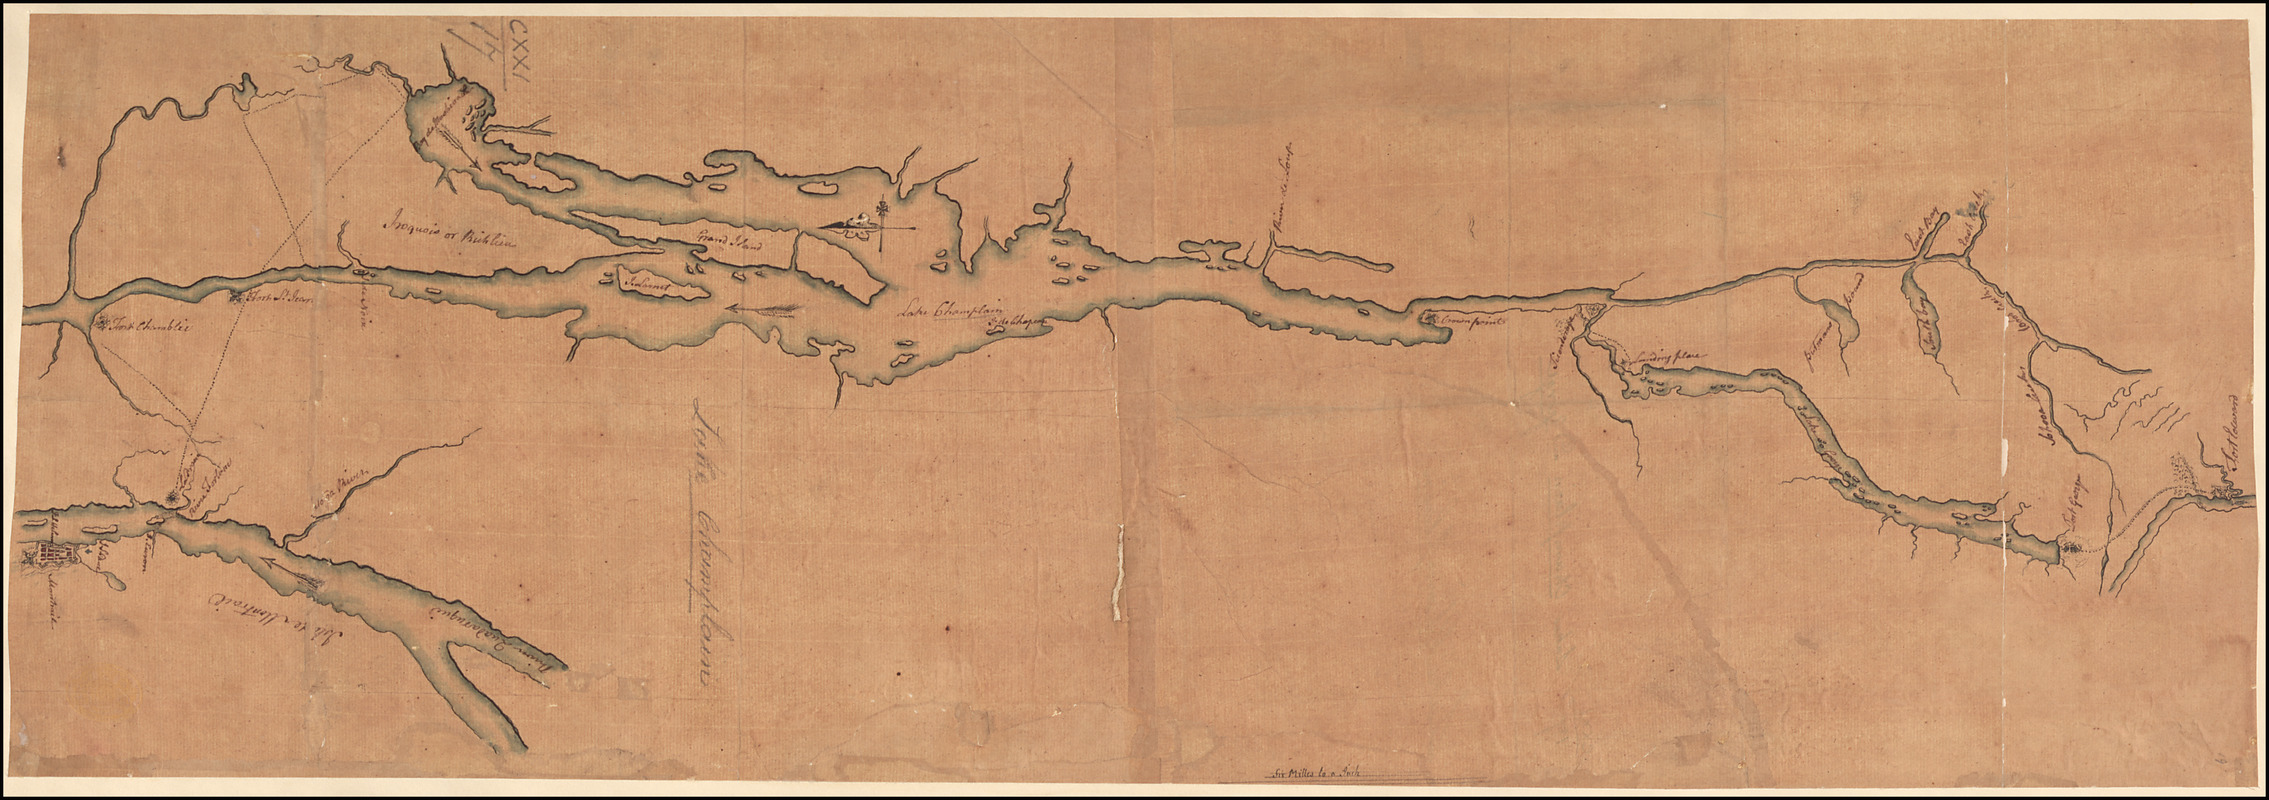 [A map of Lake Champlain and Lake George, showing the route from Fort Edward to Montreal]